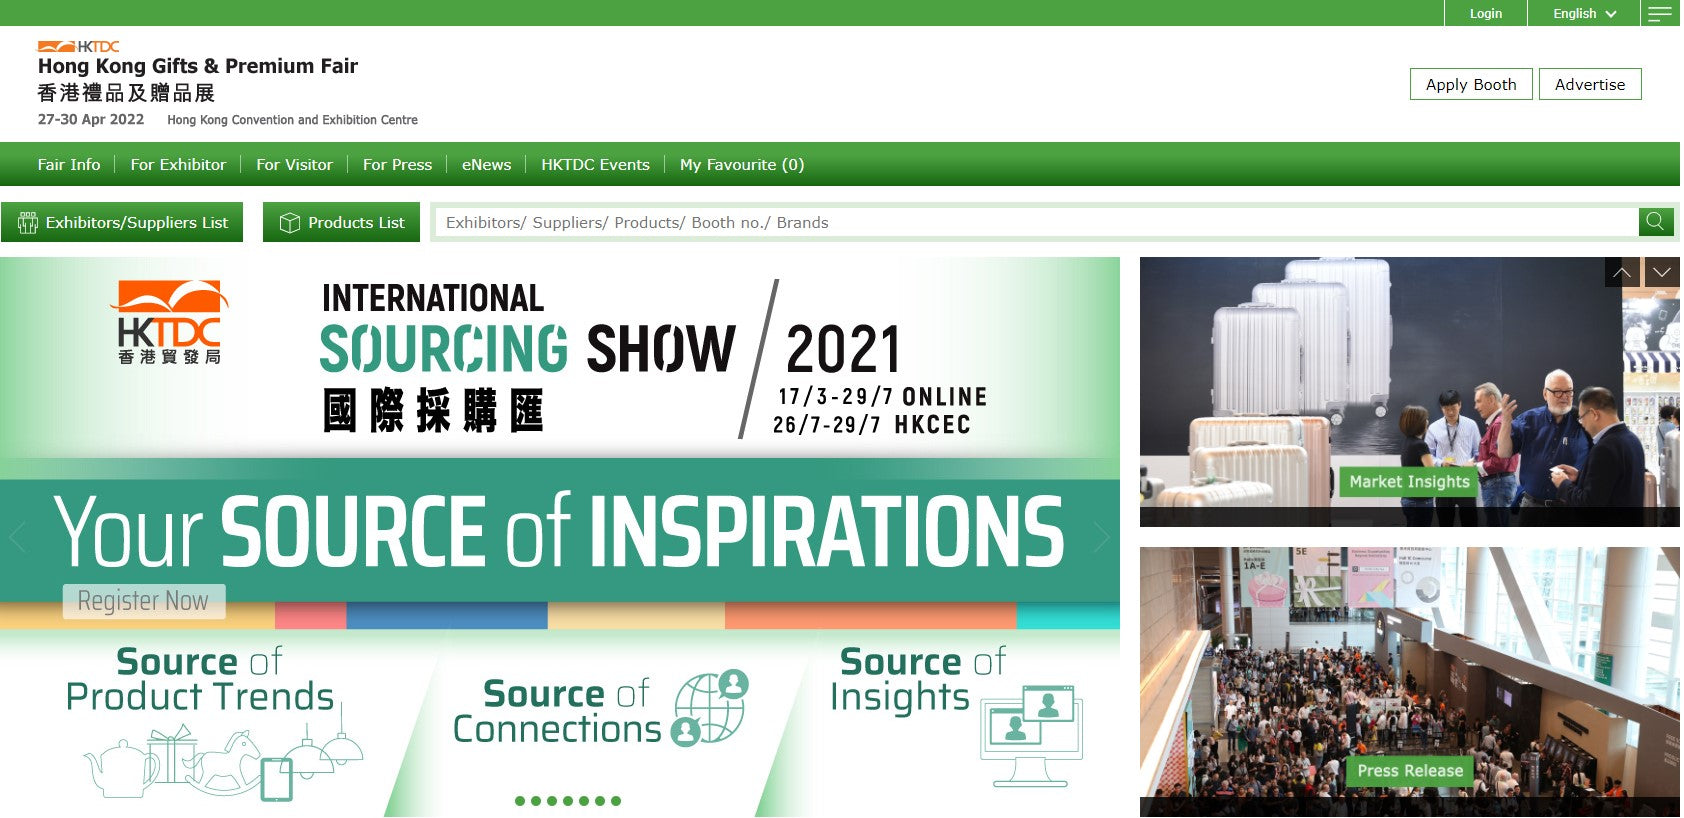 news-Lexuma-Agent-Product-Travel-Scratch-Maps-listed-on-the-Sourcing-on-hktdc-com-event-page-Hong-Kong-Gifts-and-Premium-Fair-exhibition